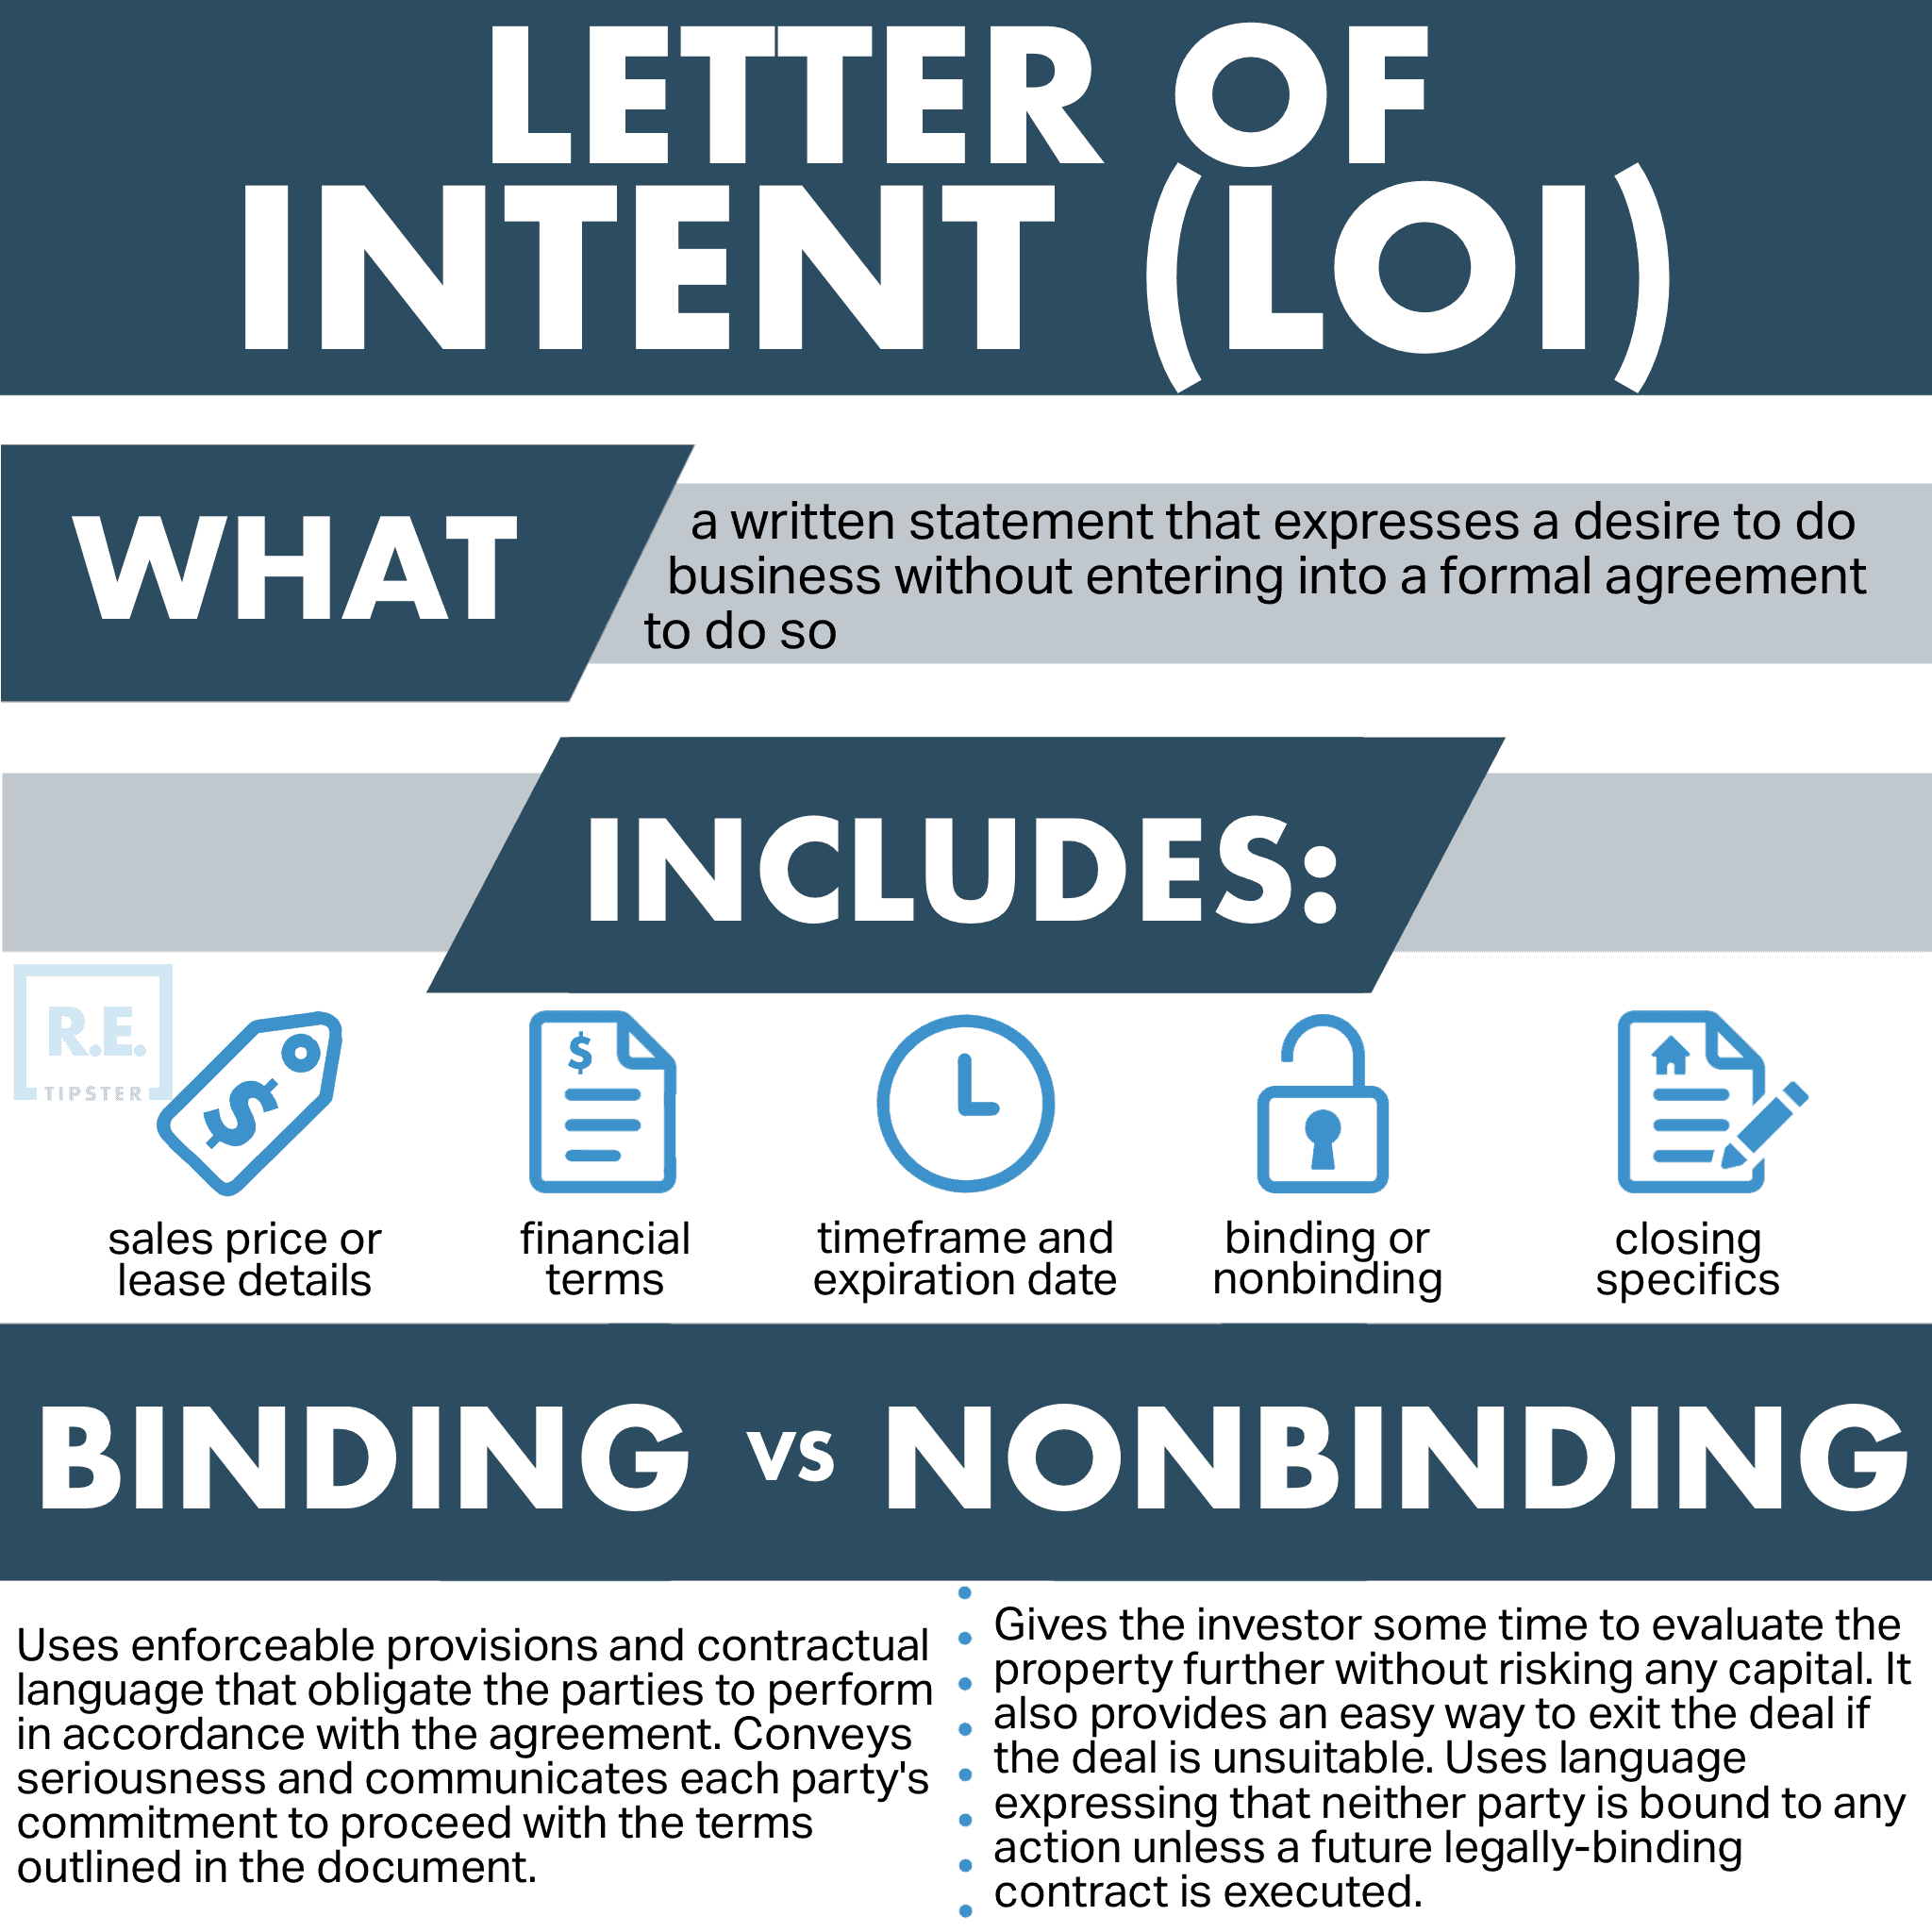 letter of intent loi infographic